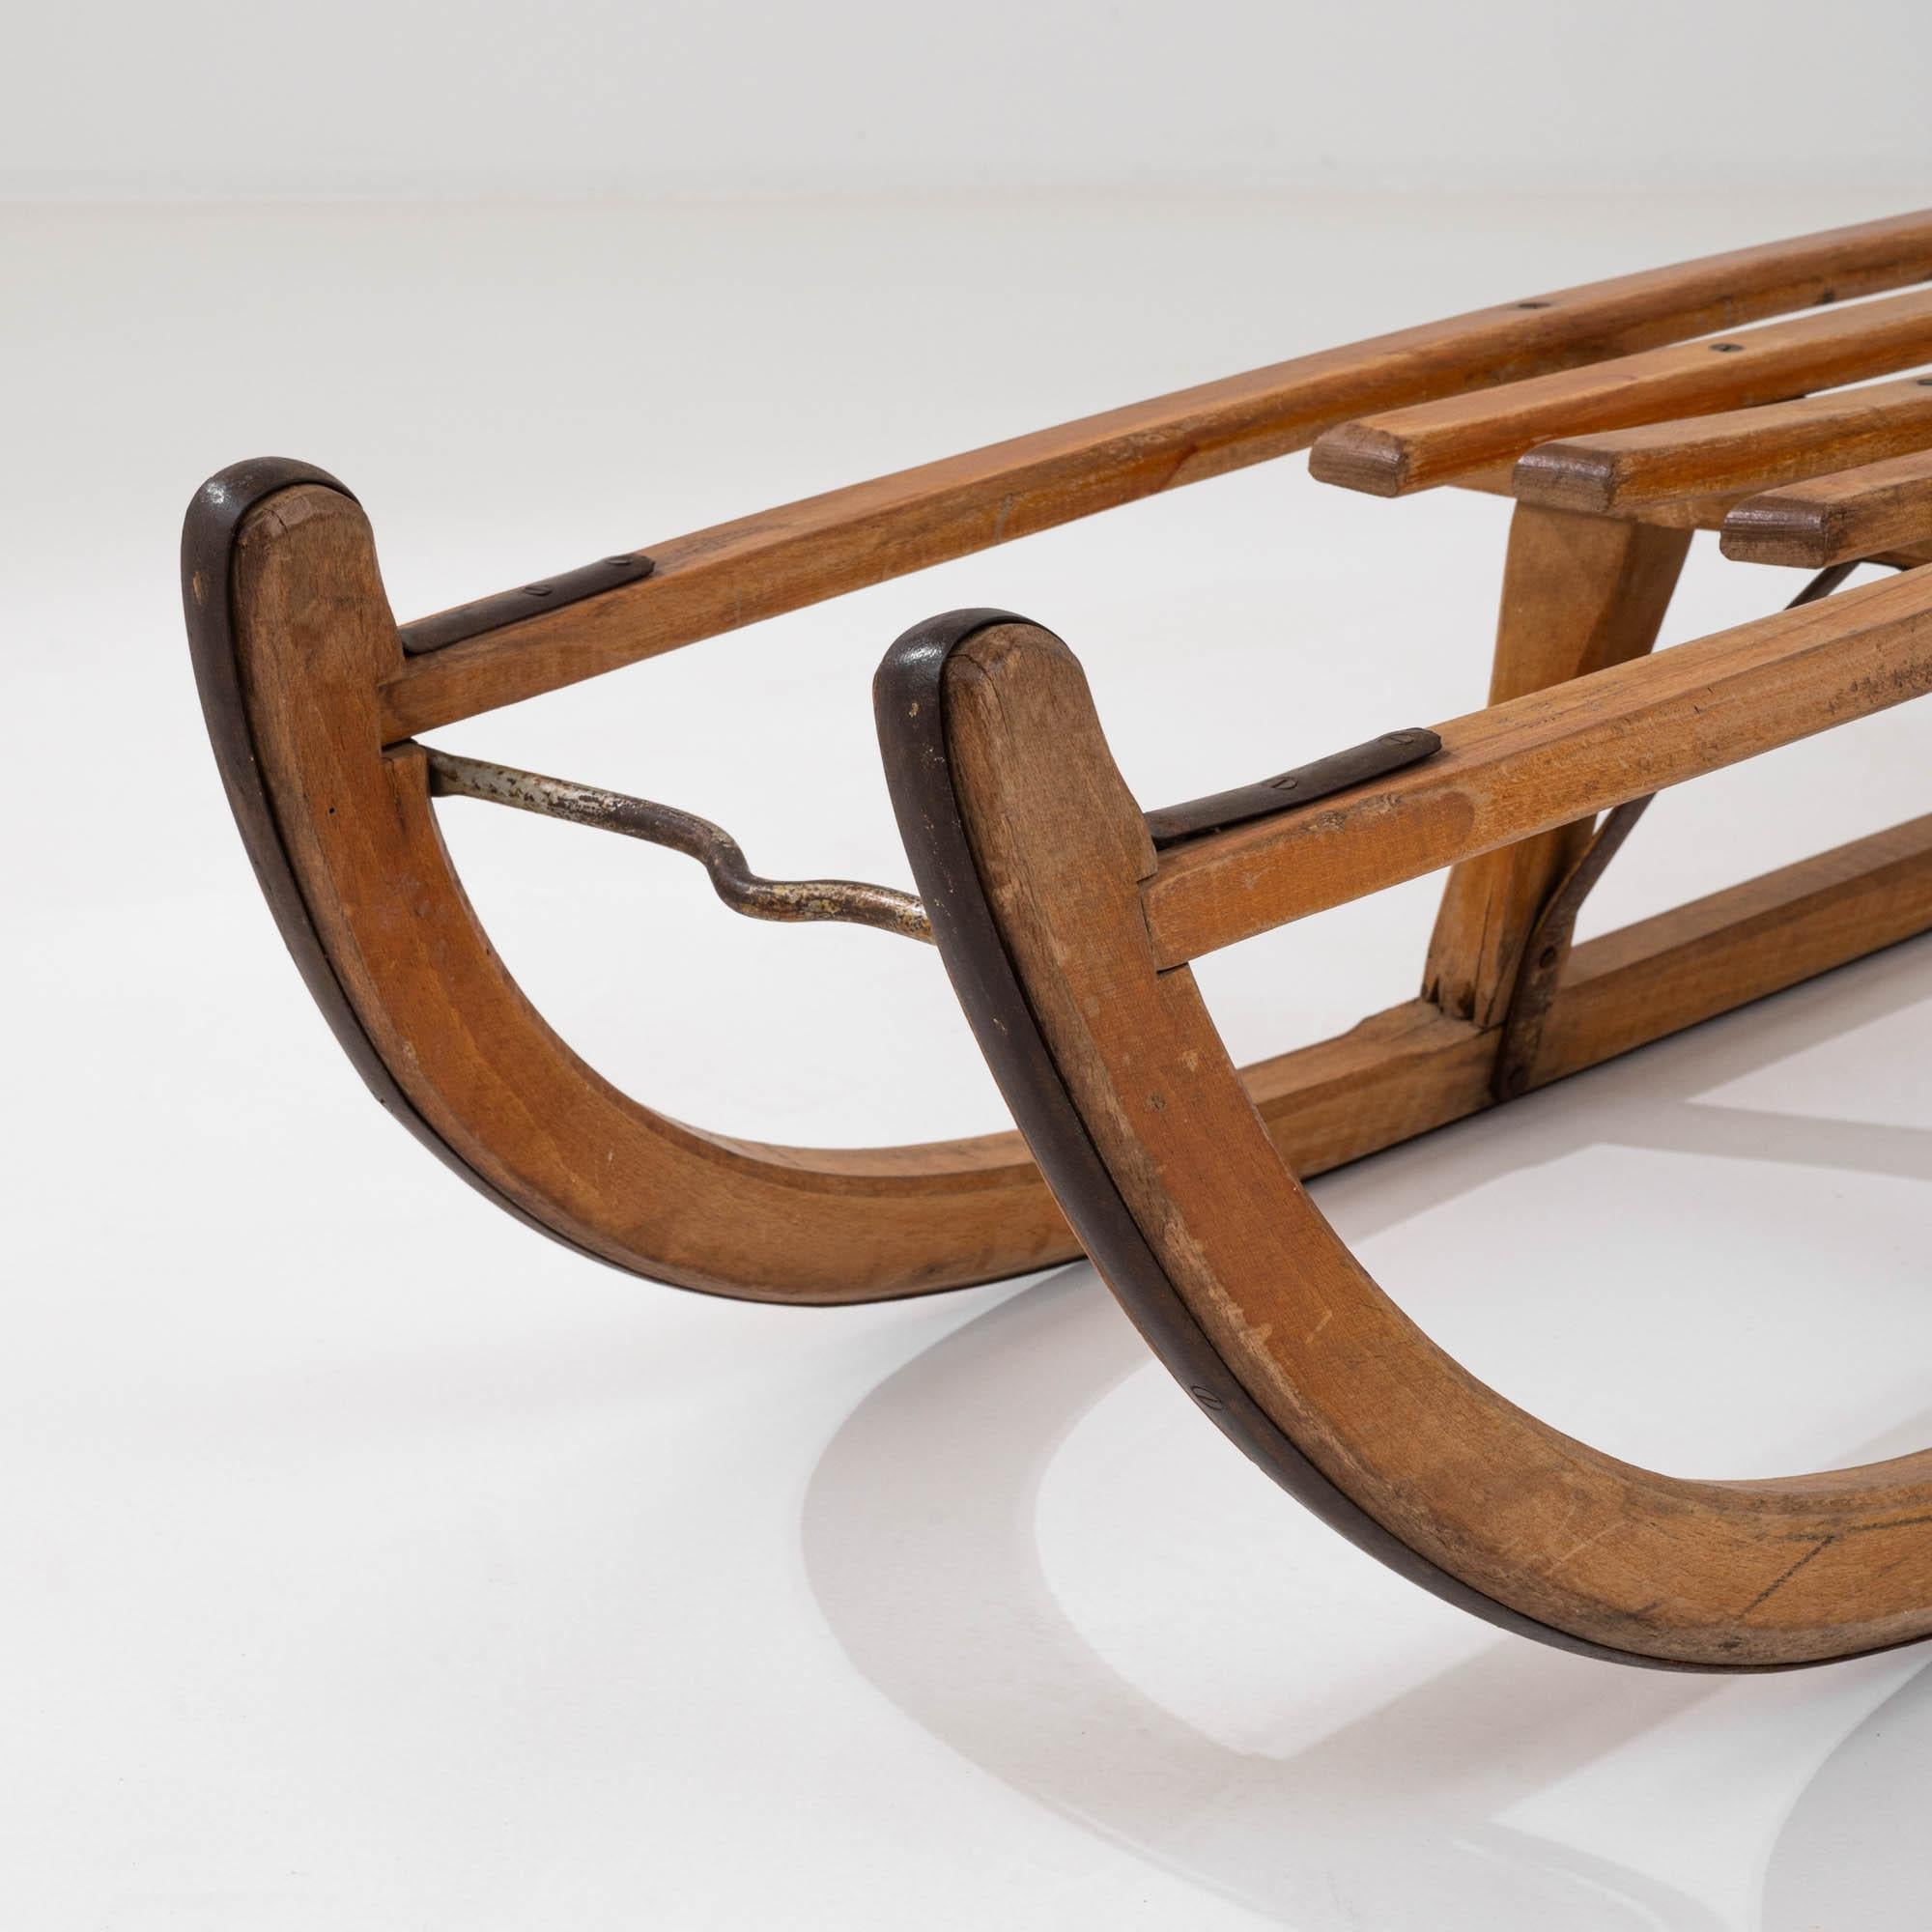 20th Century German Wooden Sled By Davos For Sale 4